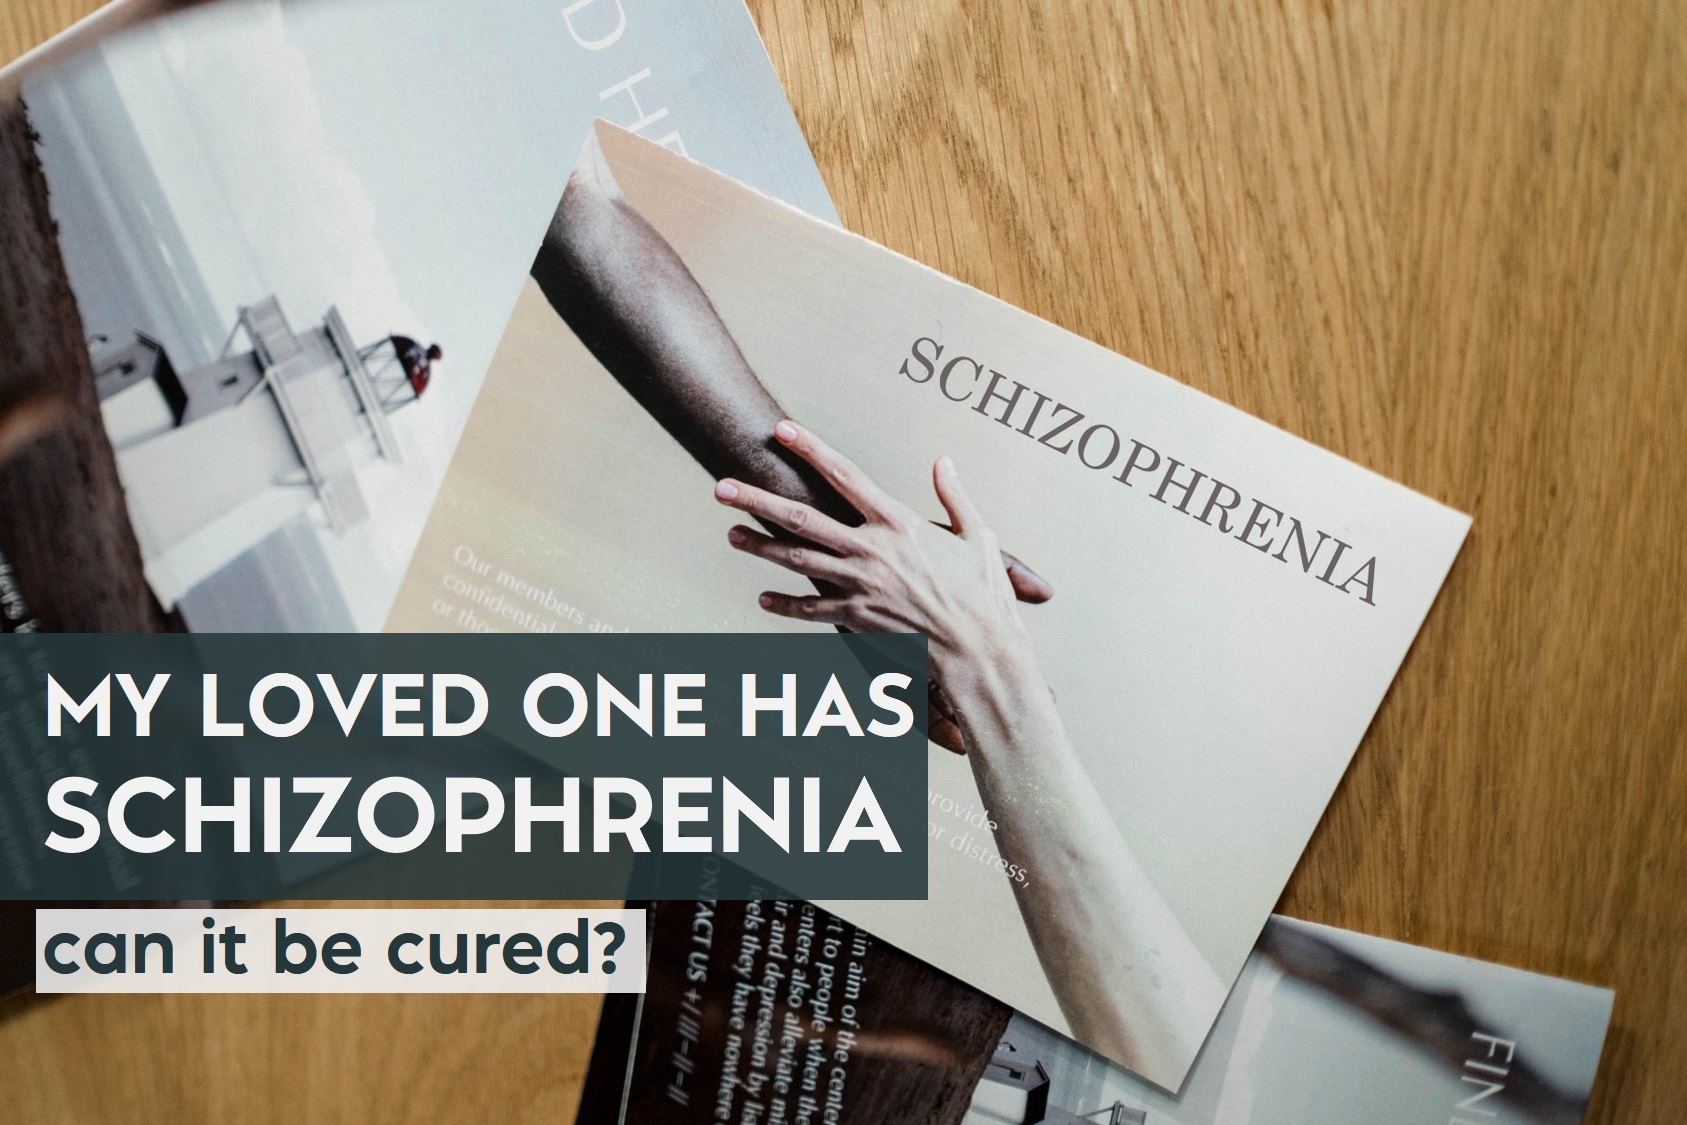 My Loved one has Schizophrenia. Is there a permanent cure?